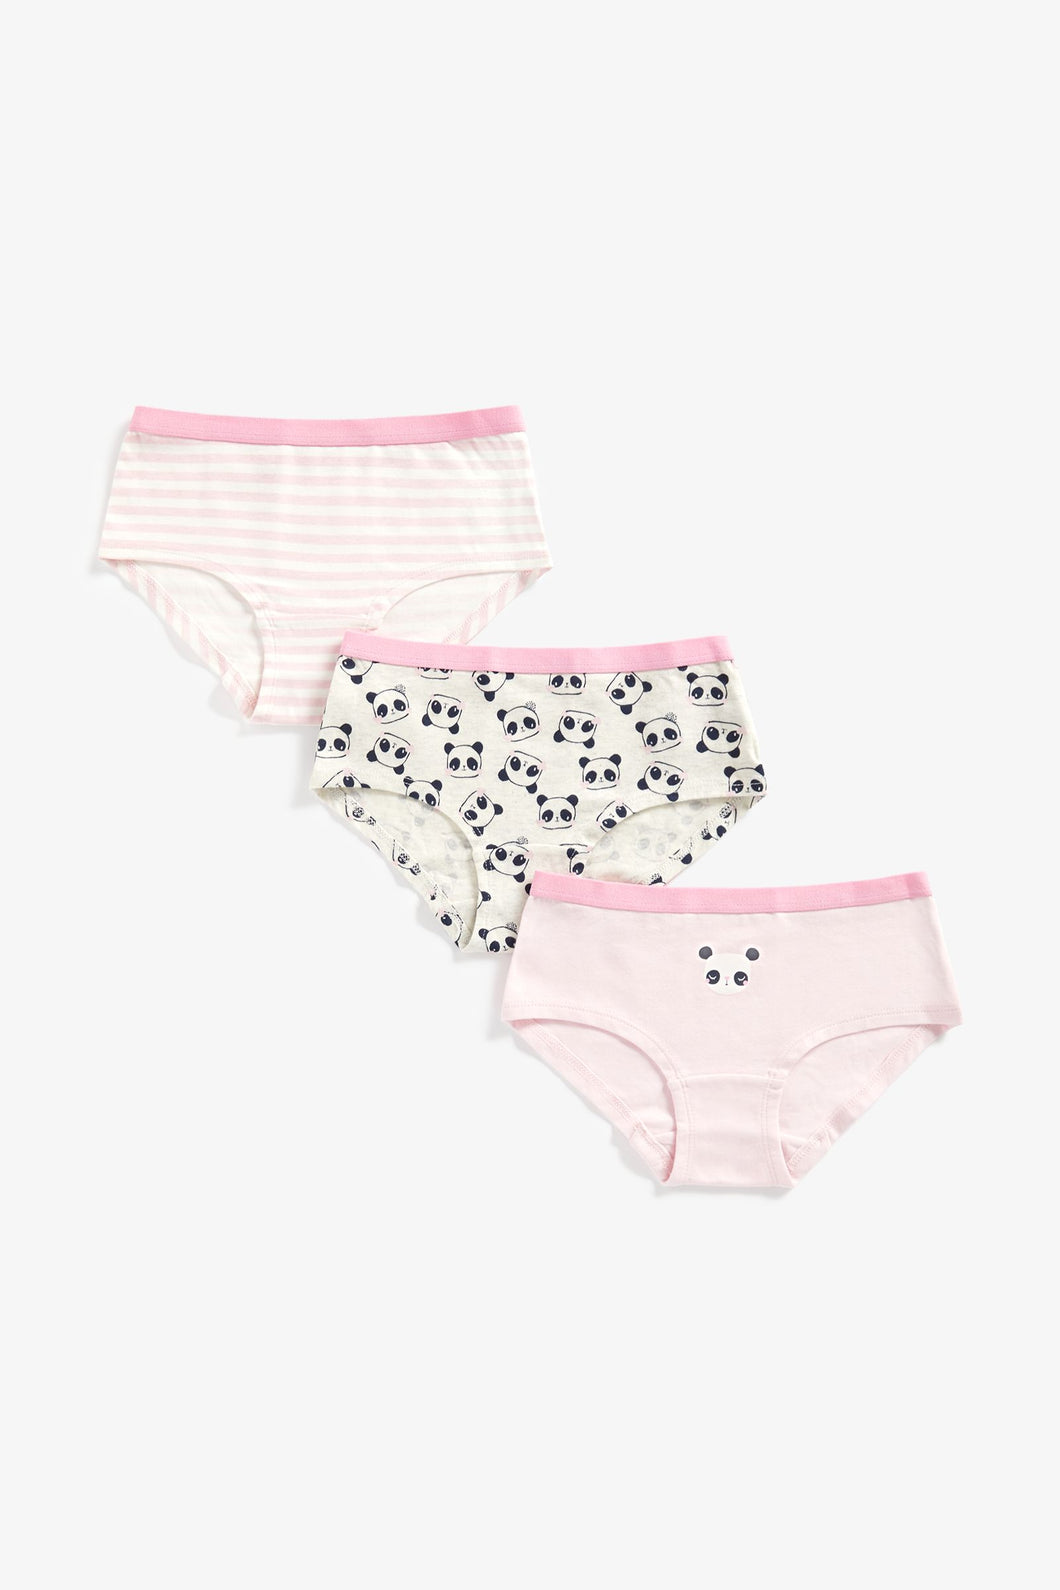 Mothercare Panda Hipster Briefs - 3 Pack